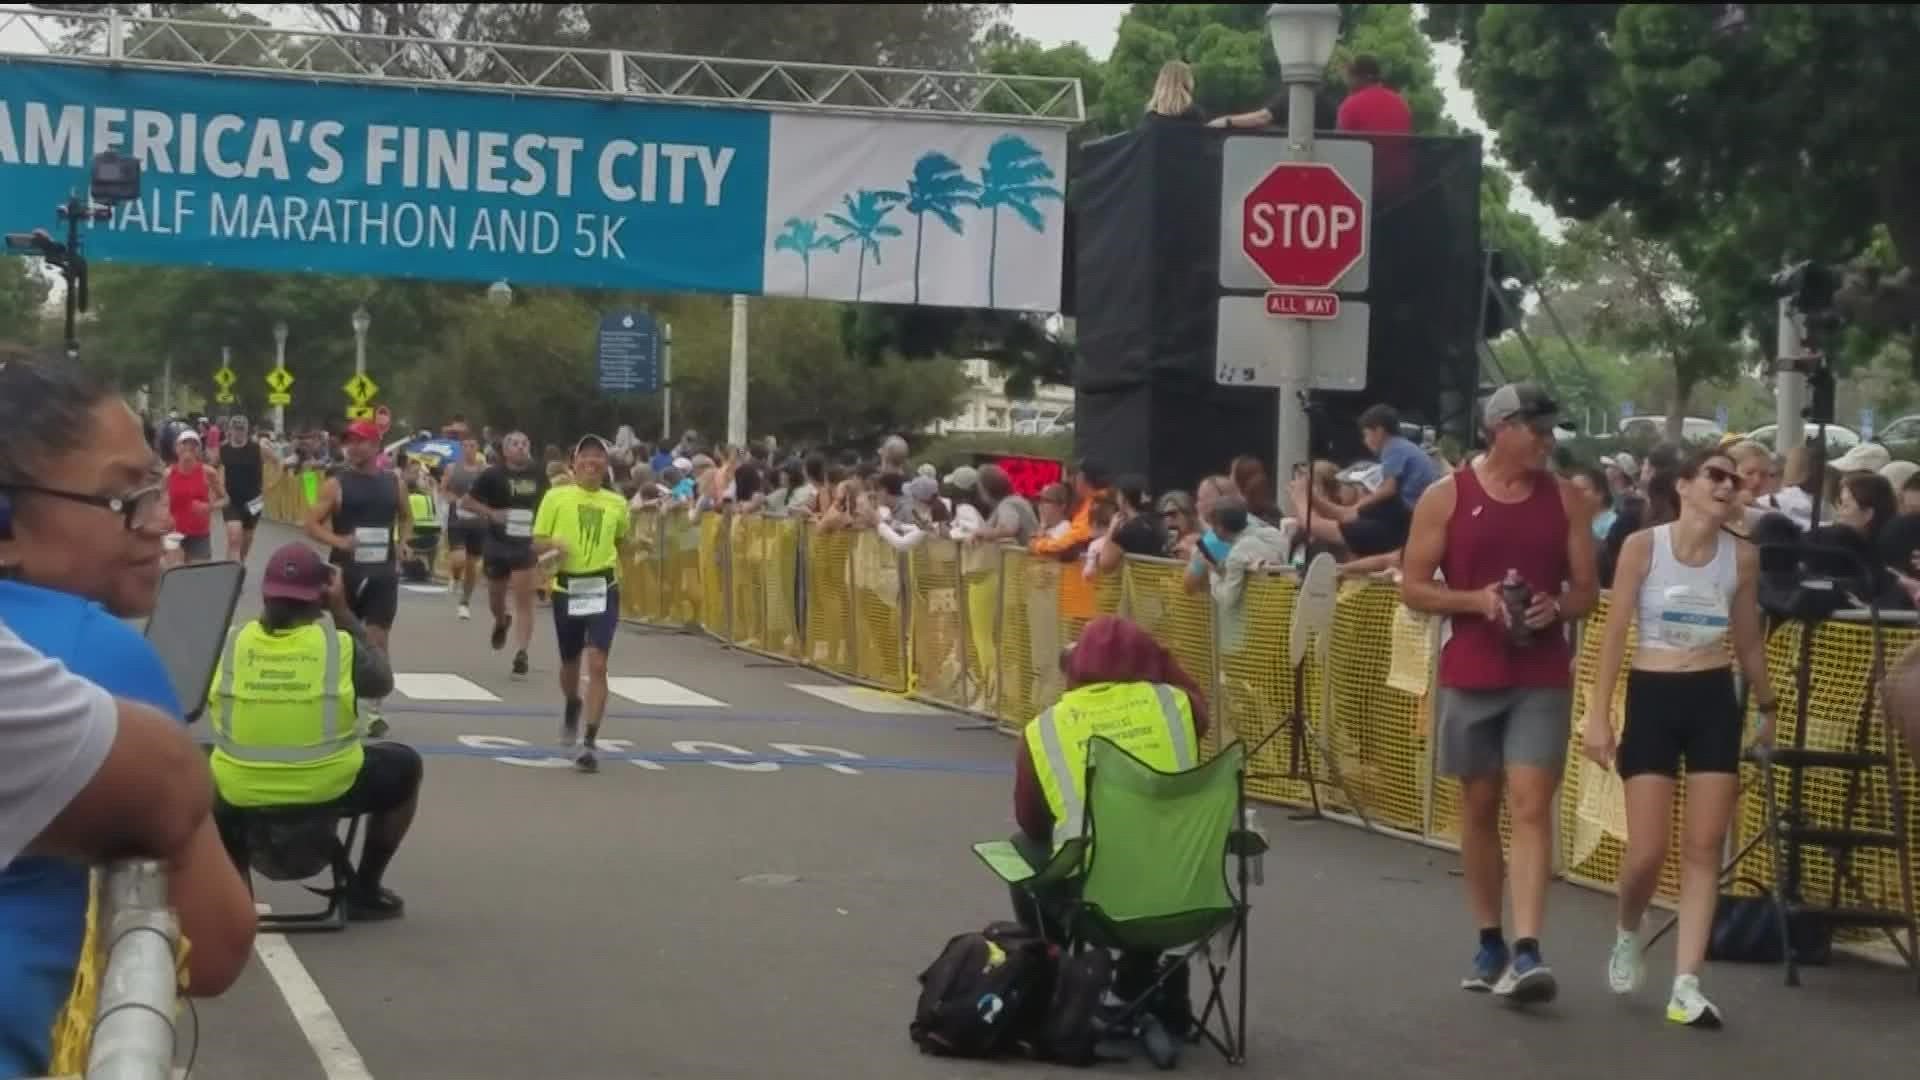 The 7th annual America’s Finest City Half-Marathon and 5K kicked off early Sunday morning.